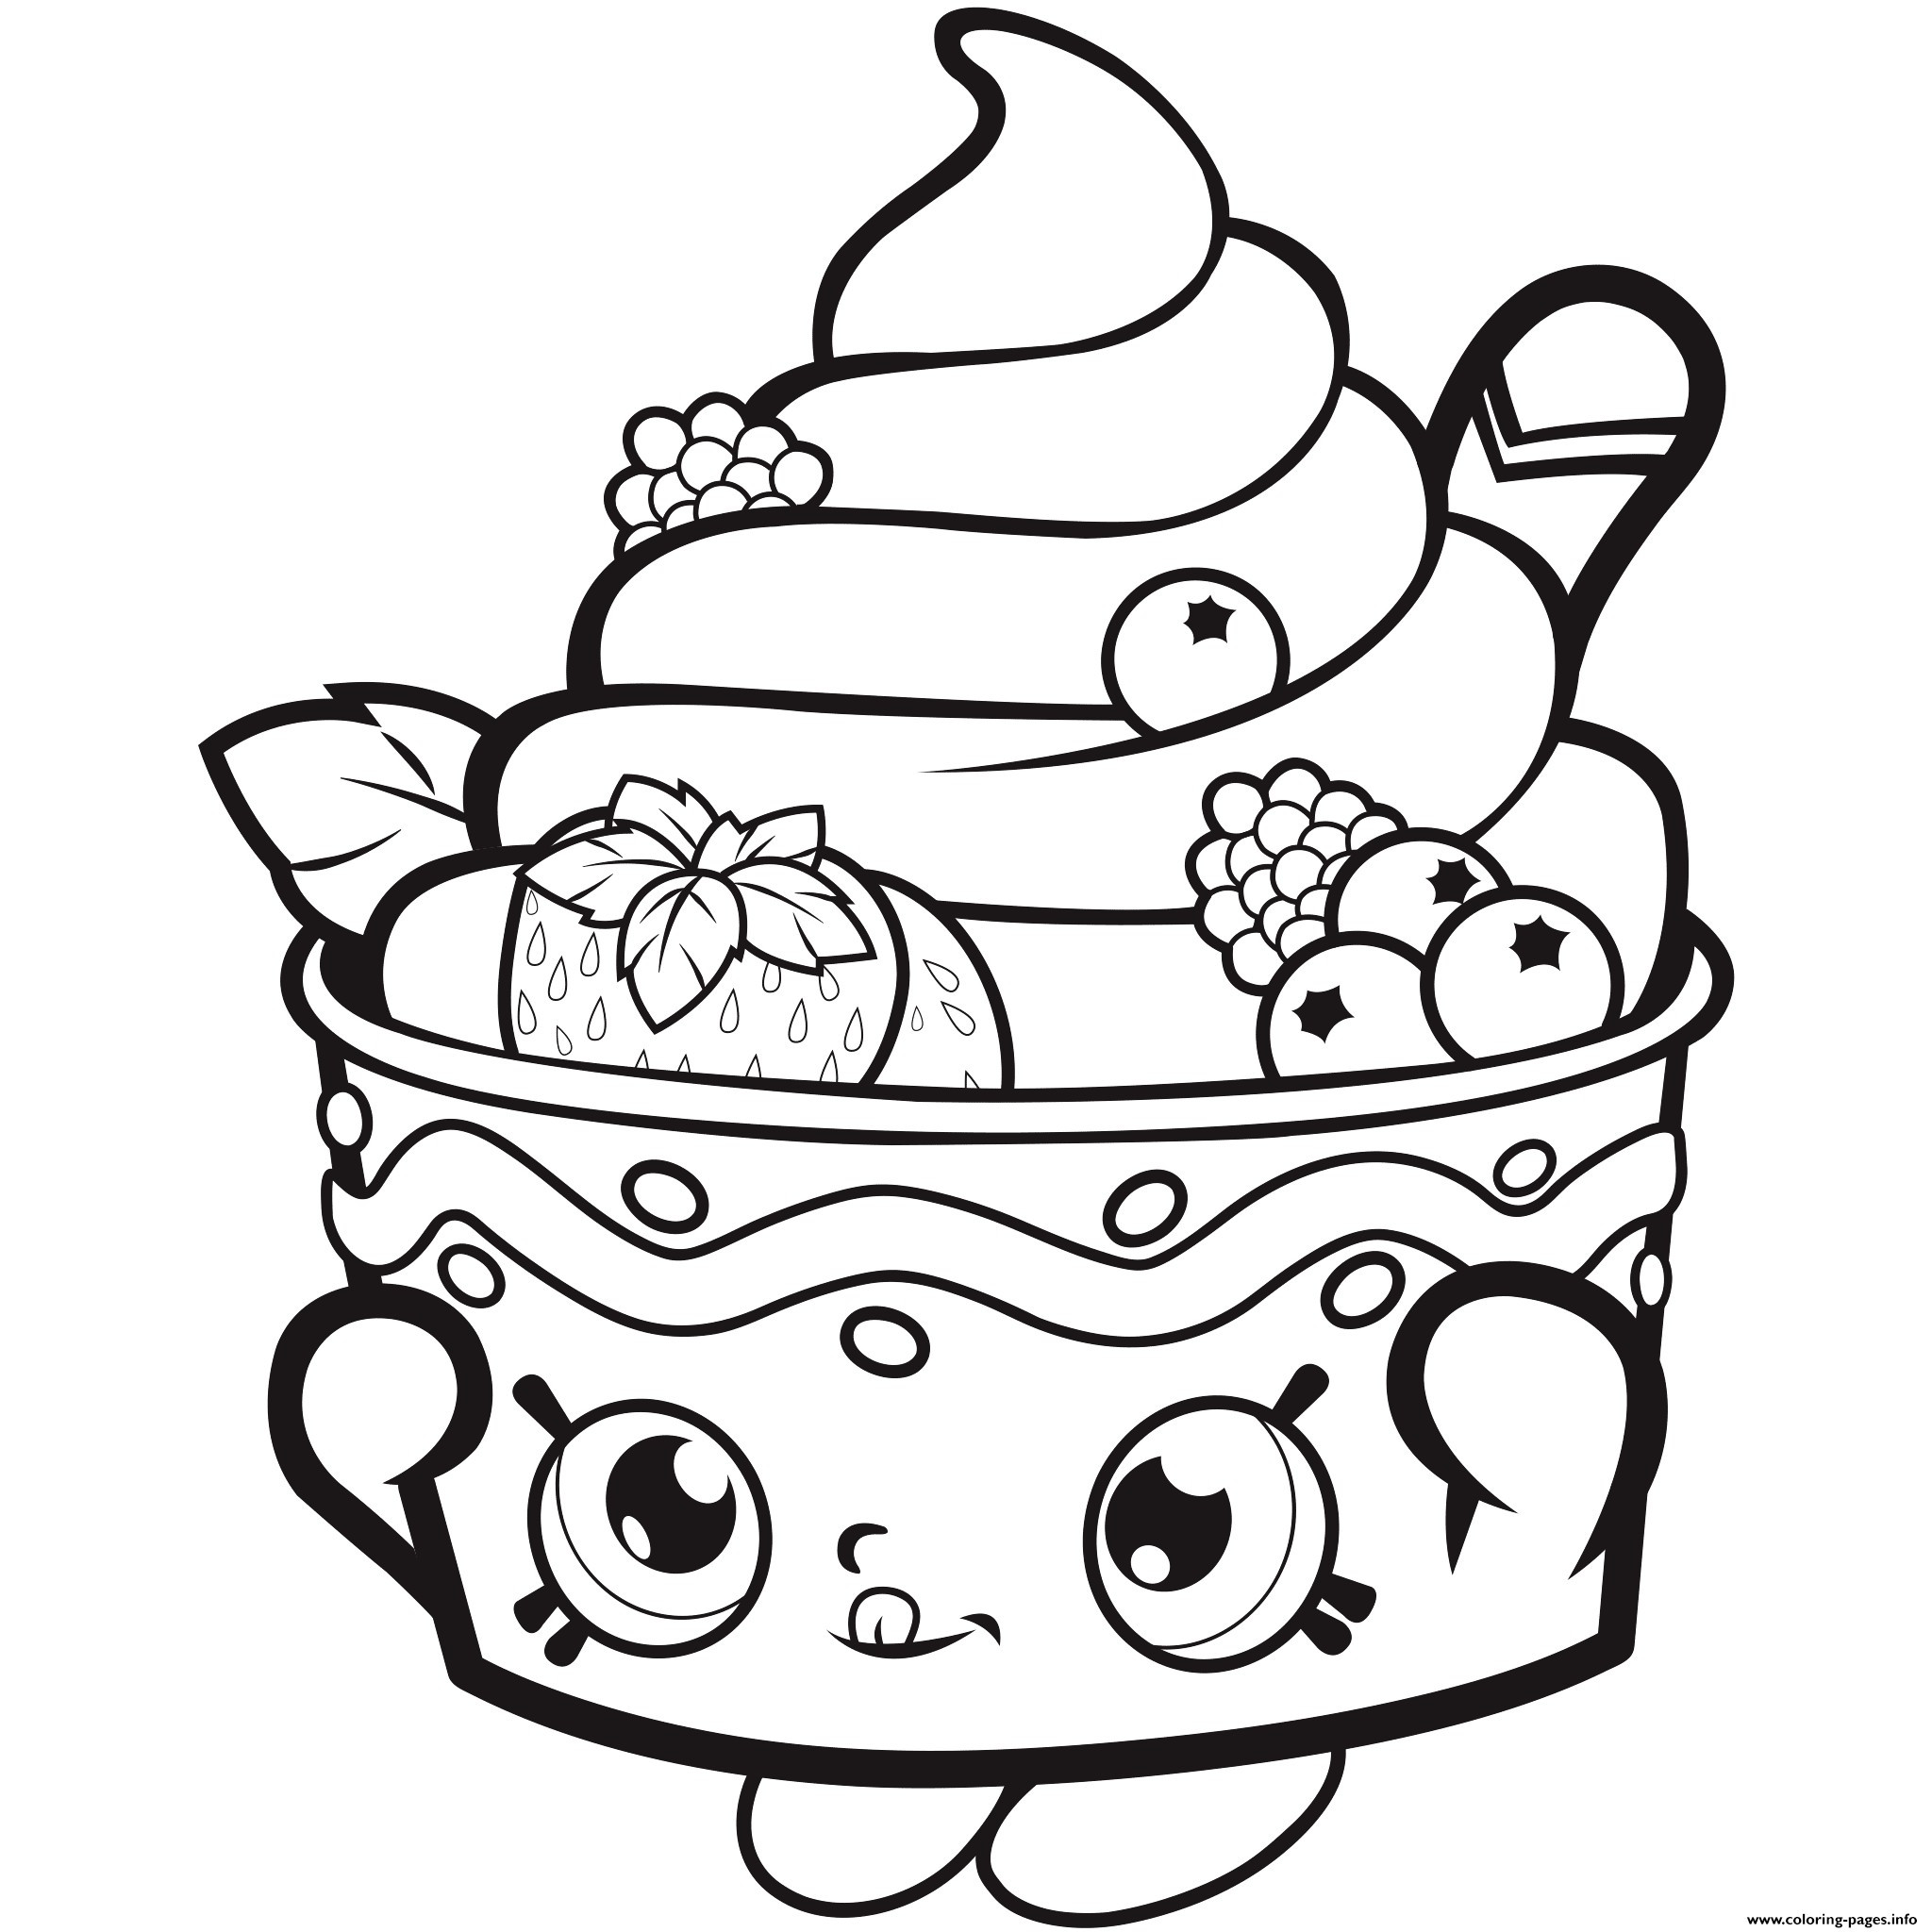 Cute Things Coloring Pages at GetColorings.com | Free ...